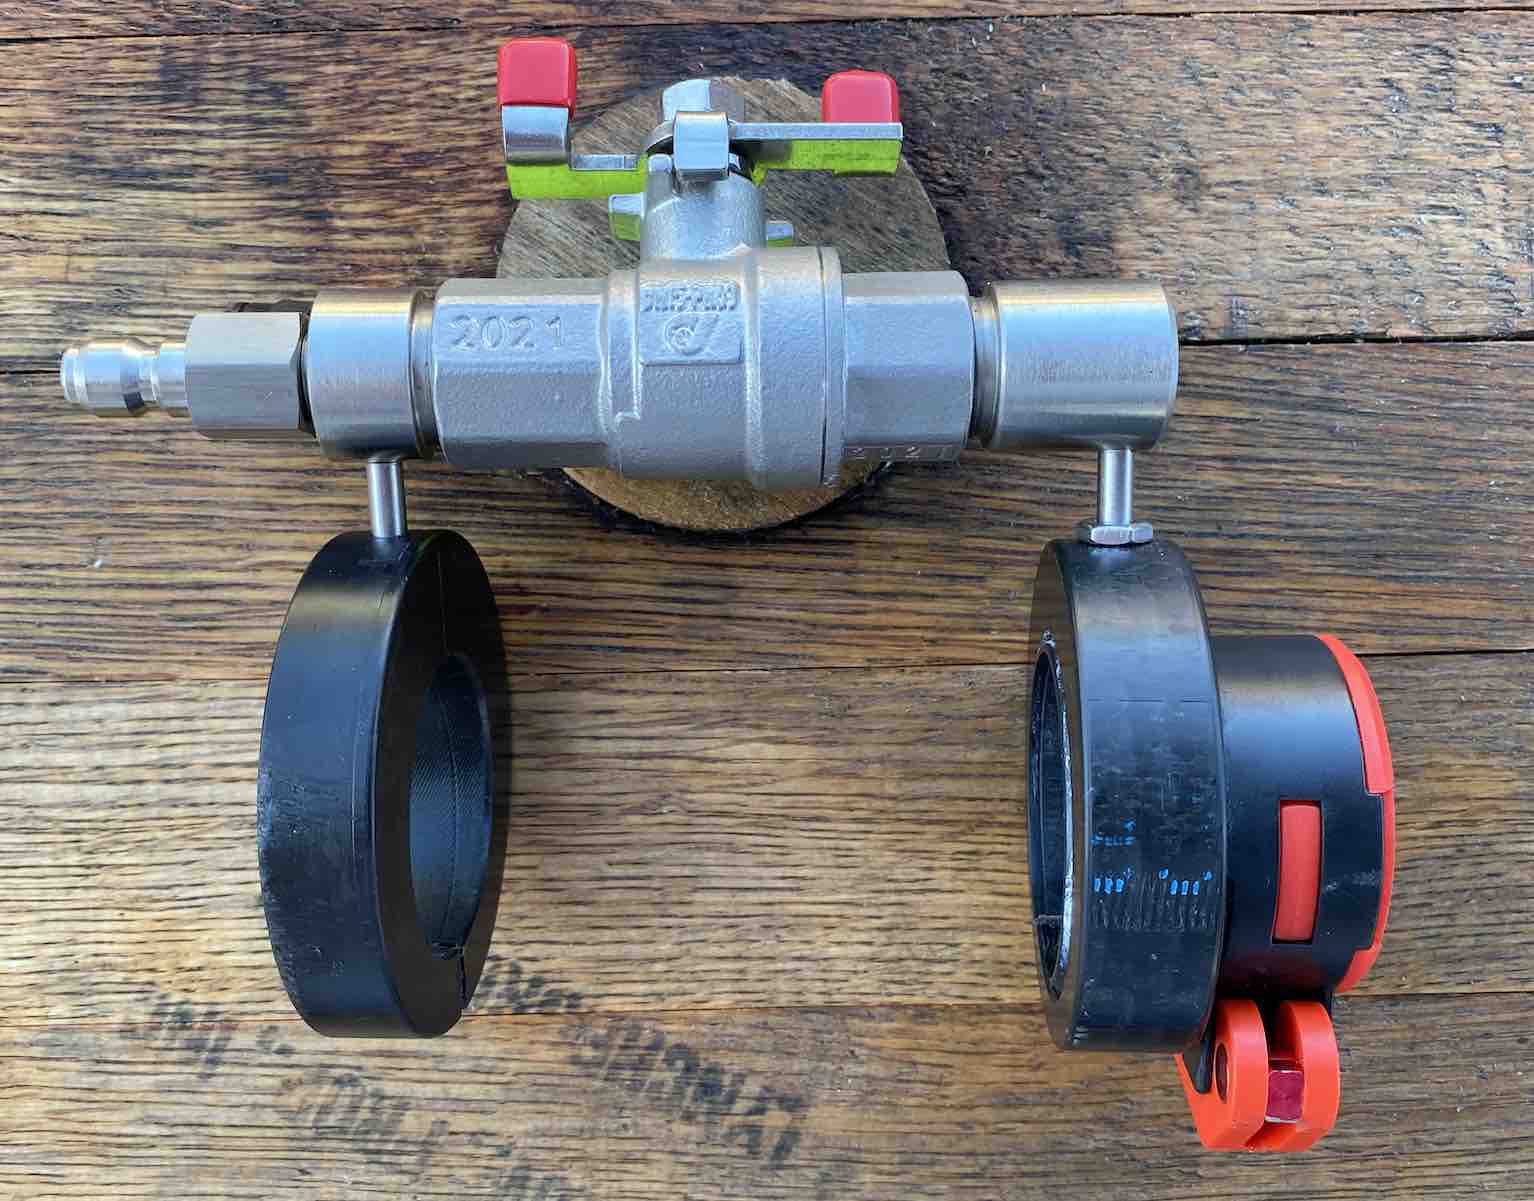 BENZ SLIDING WFP VALVE: Pole valve for applying softwash chemicals to roofs and render.